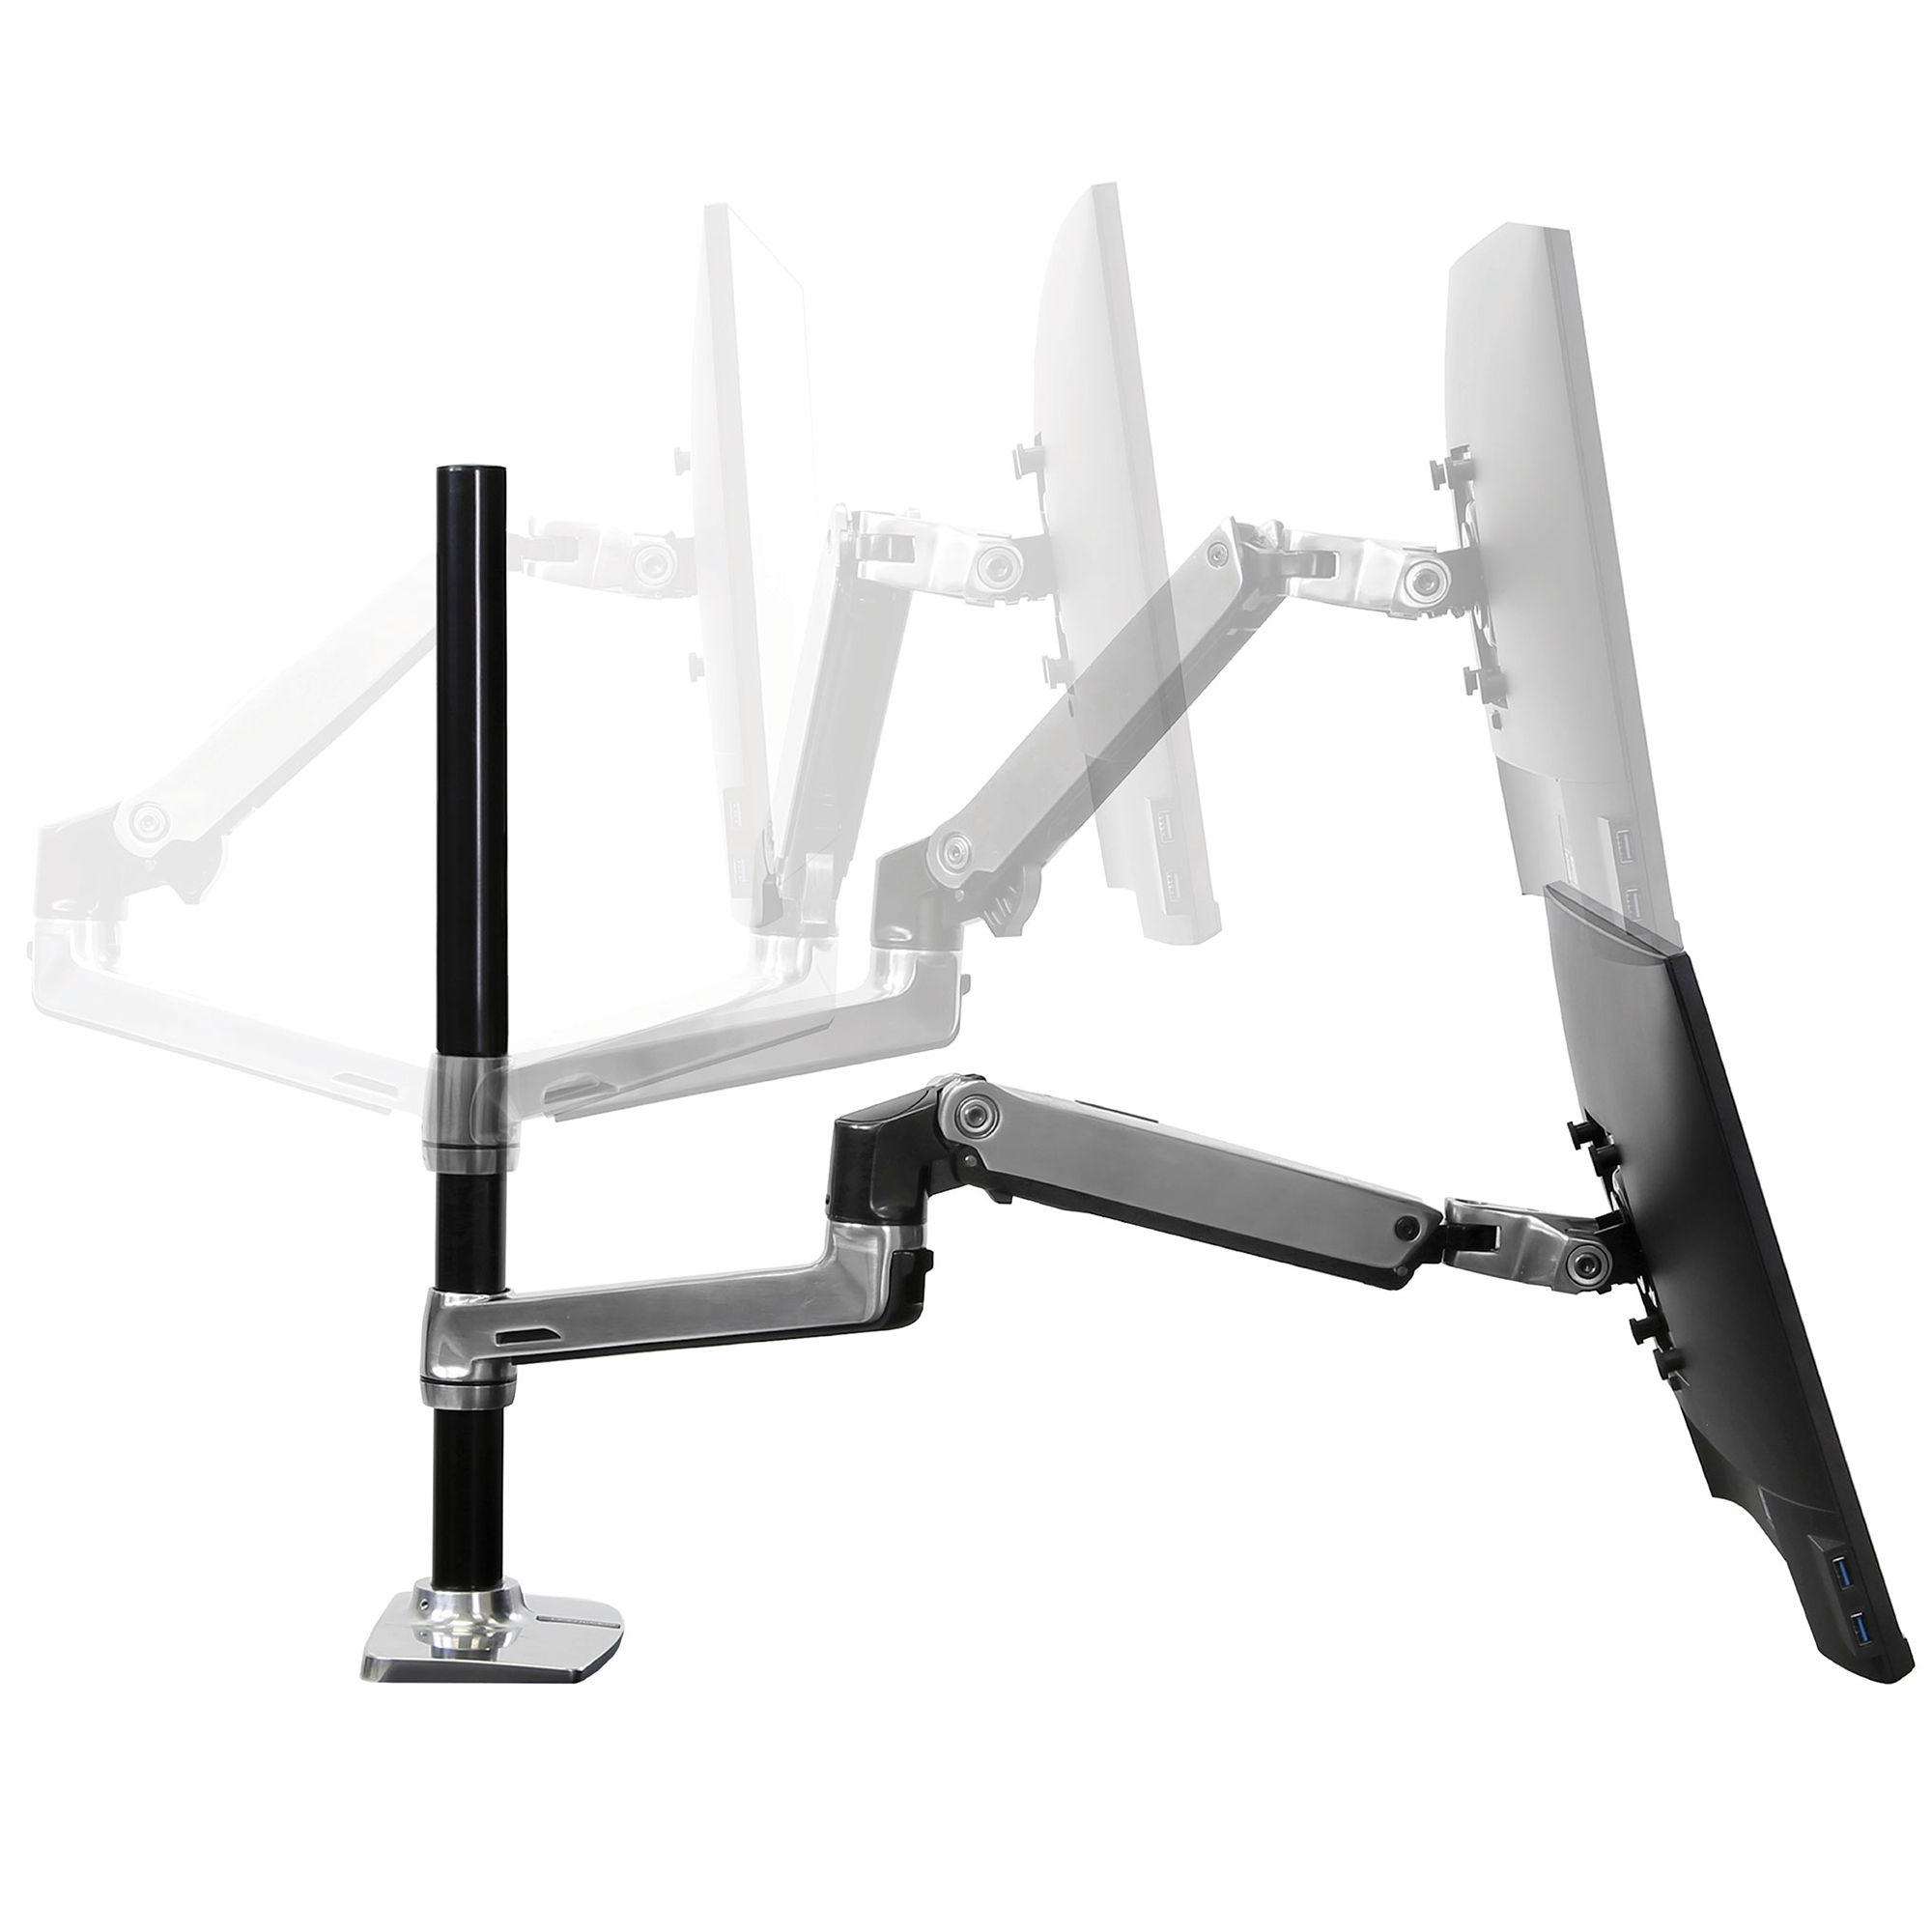 Ergotron LX Dual Stacking Arm with Tall Pole | Multi-Monitor Mount